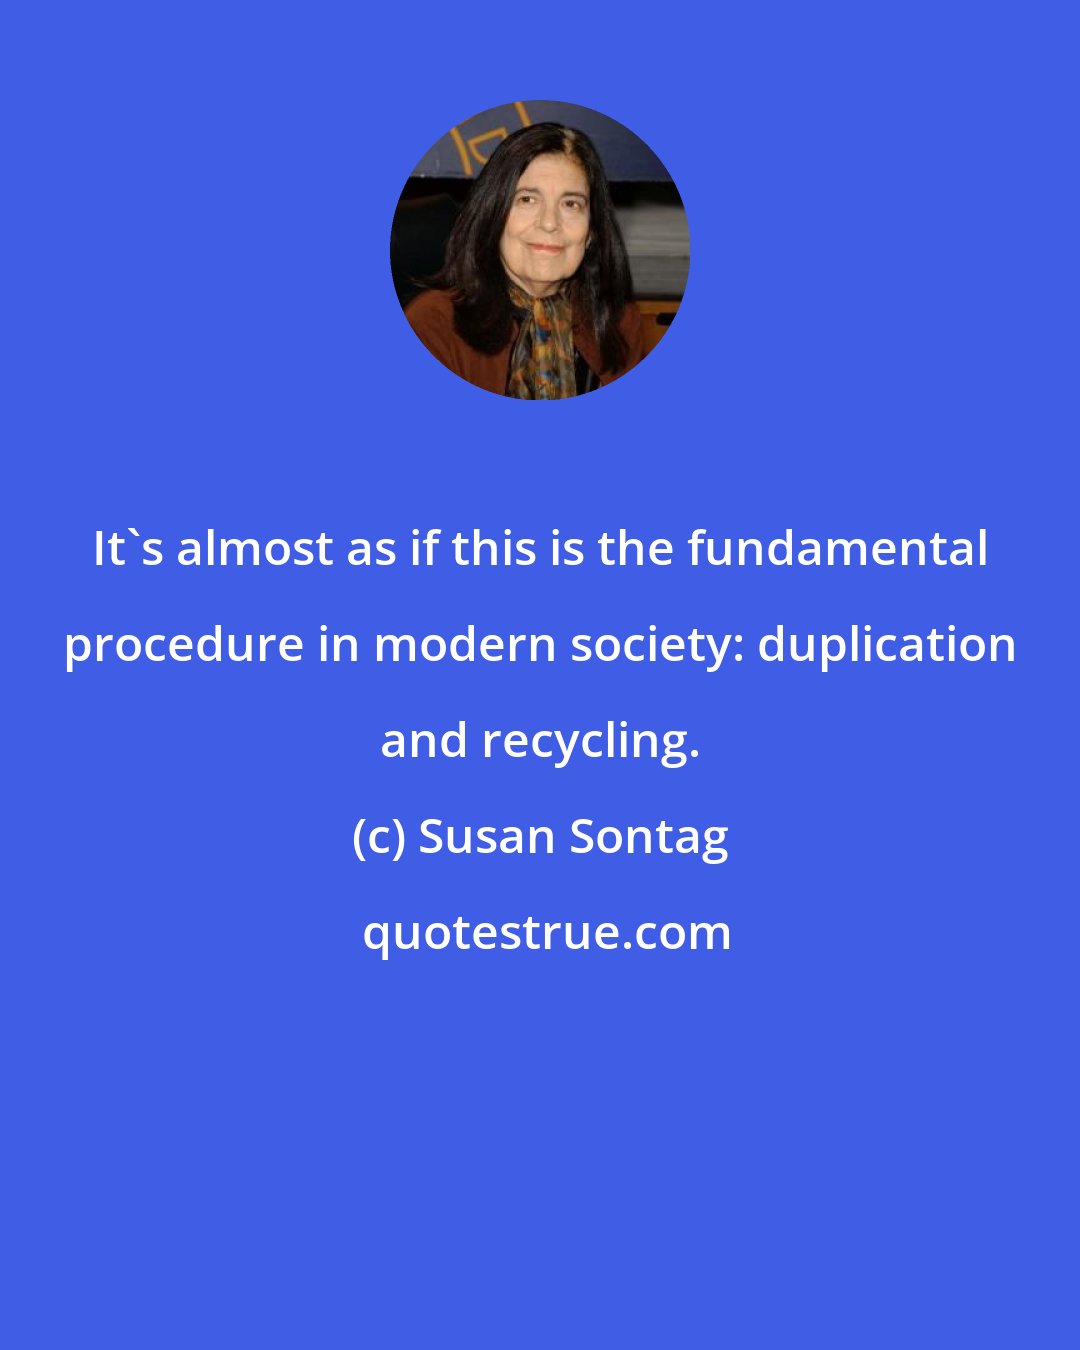 Susan Sontag: It's almost as if this is the fundamental procedure in modern society: duplication and recycling.